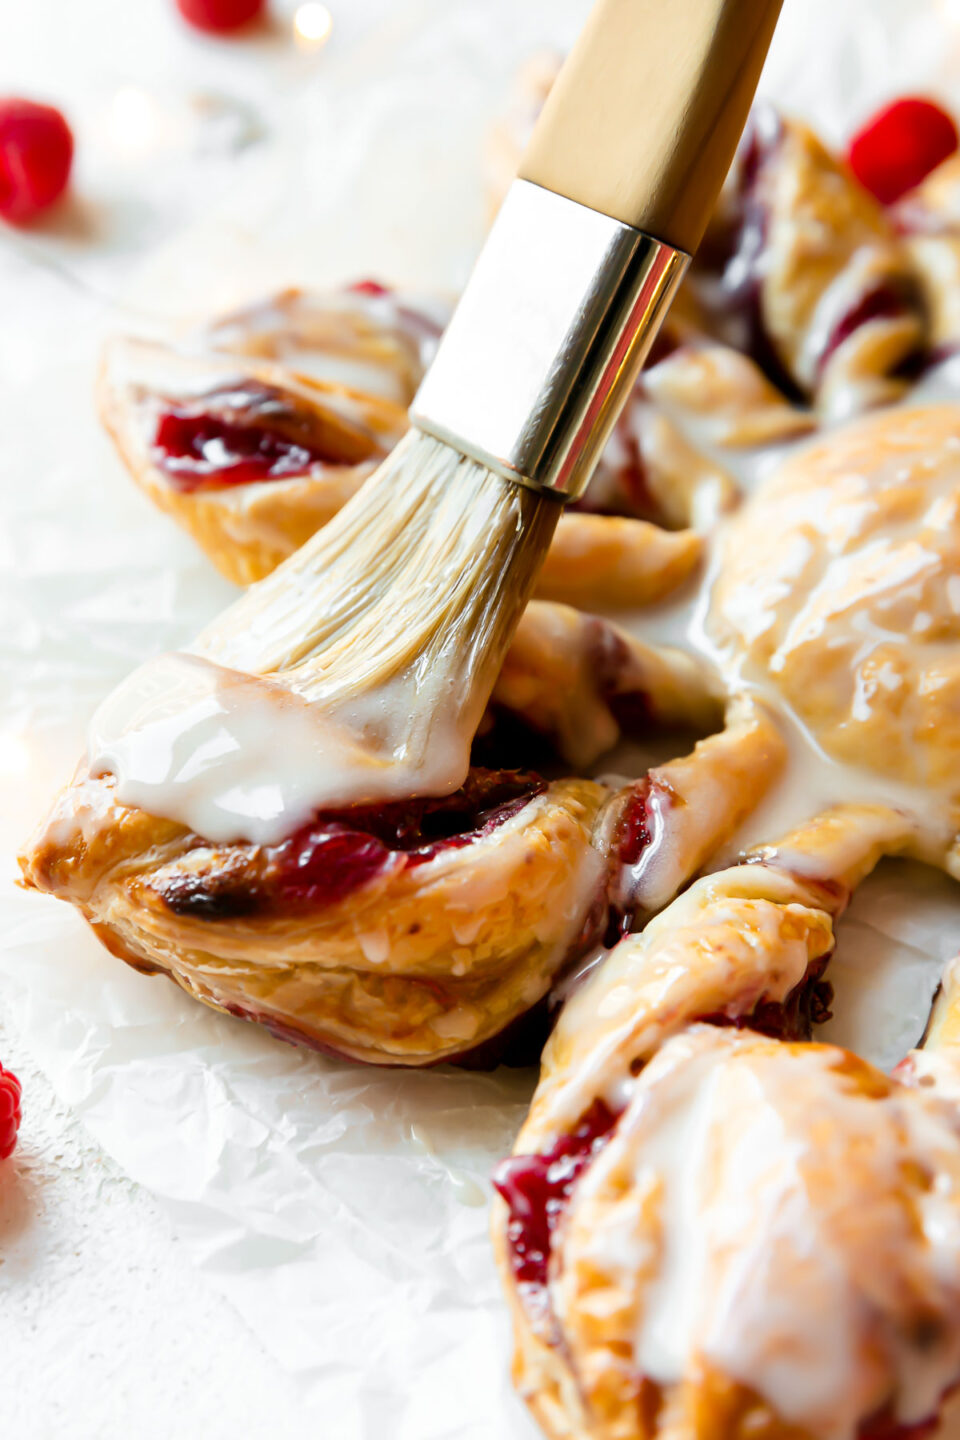 A side angle shot of baked Christmas Kringle puff pastry star with icing. A pastry brush brushes additional icing on the puff pastry star. The pastry sits atop a piece of parchment paper. Loose raspberries surround the pastry.